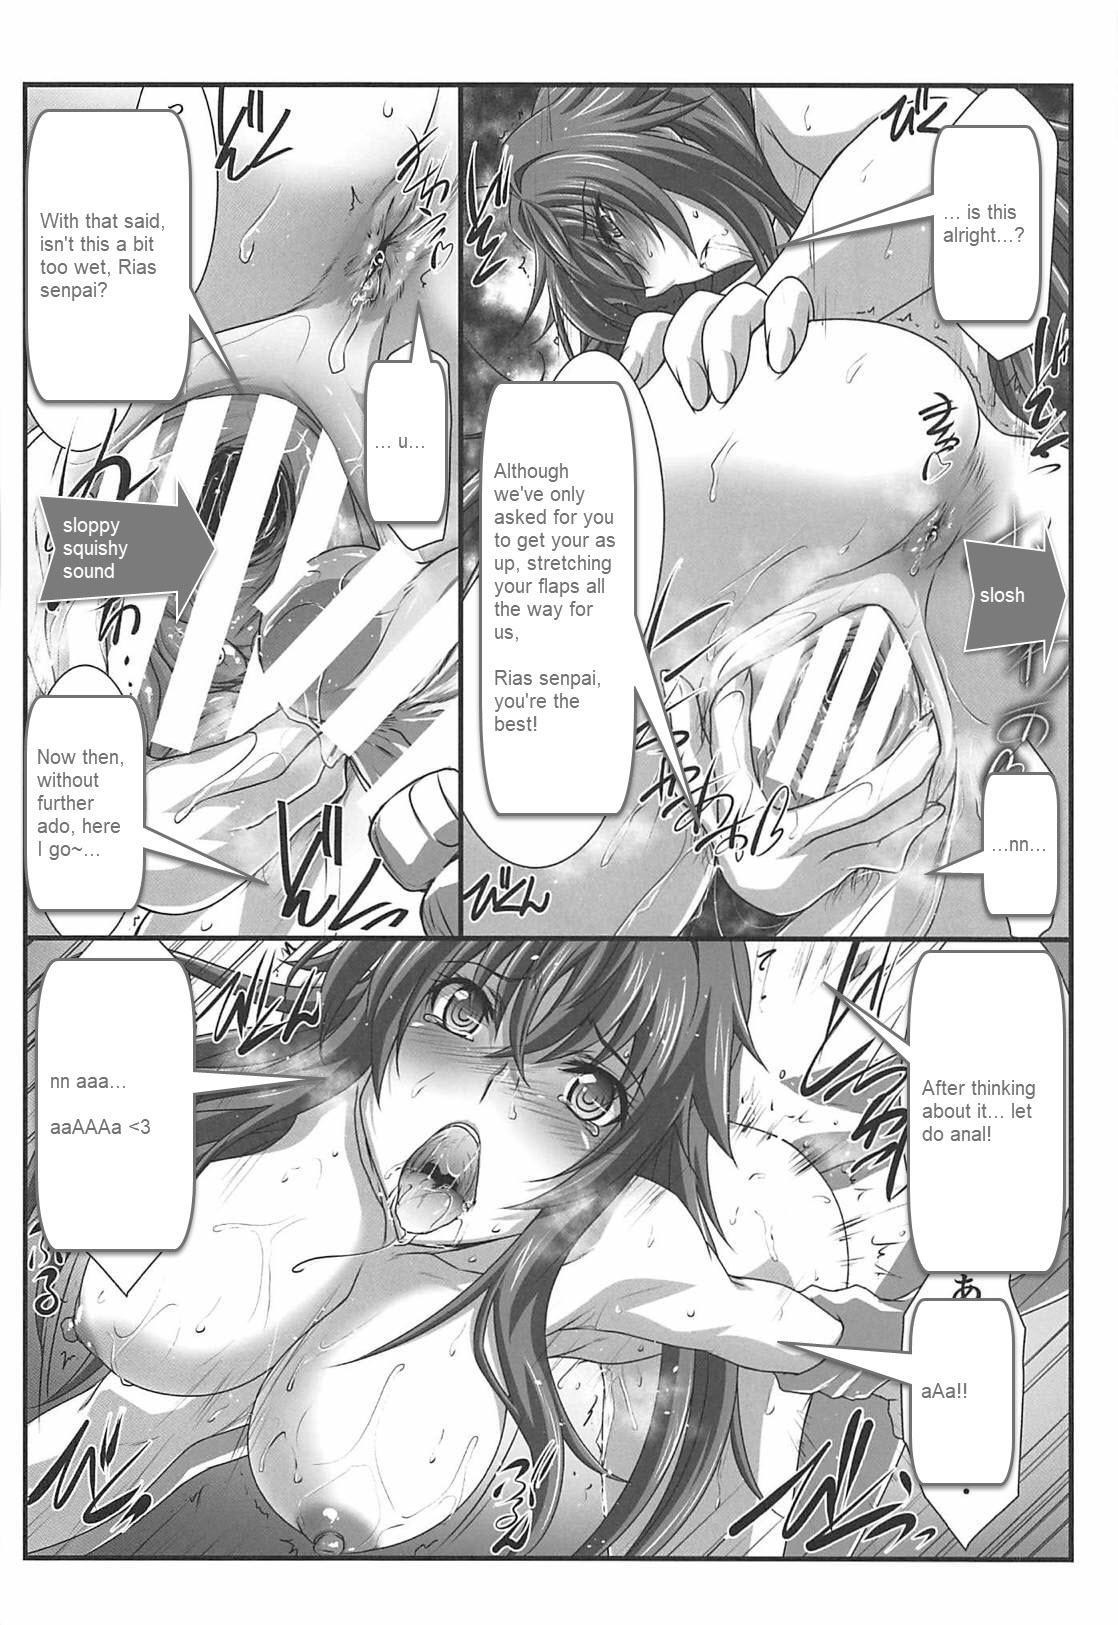 Fucked SPIRAL ZONE DxD II - Highschool dxd 8teen - Page 11